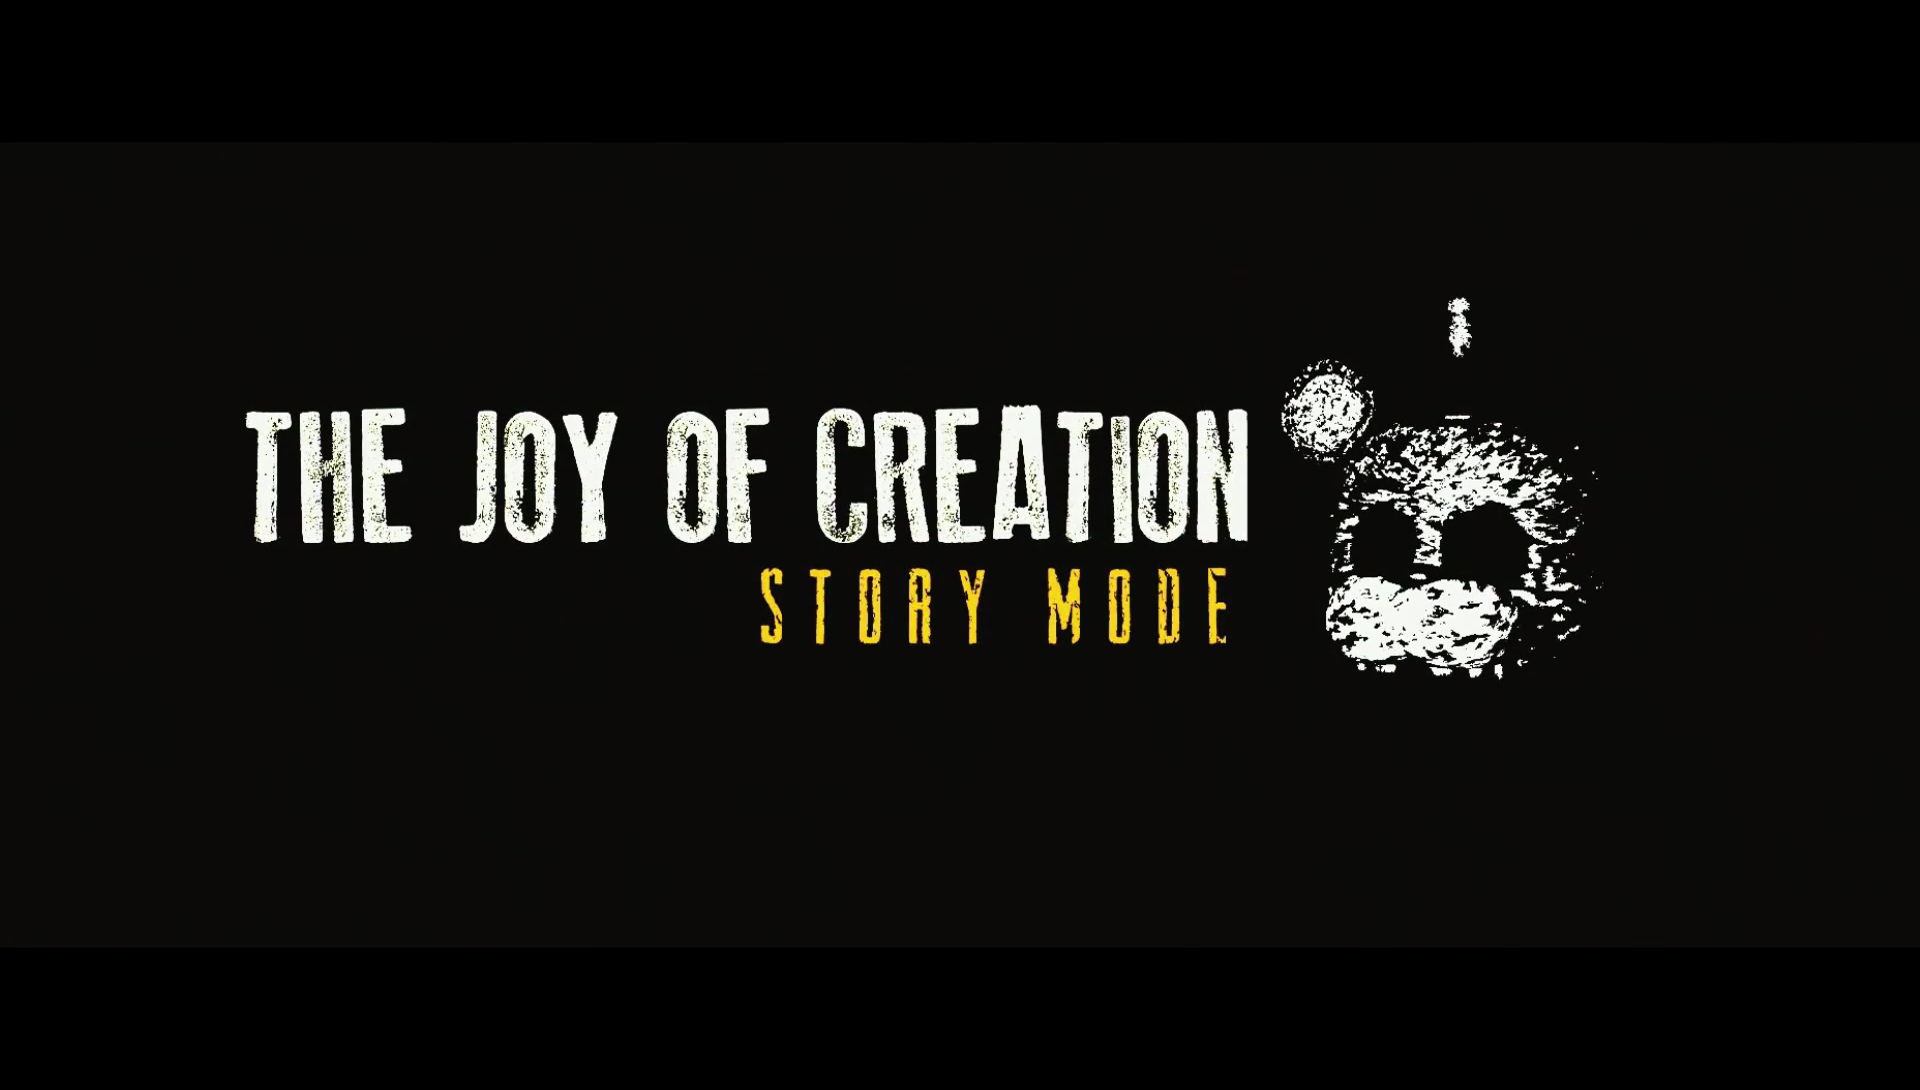 The Joy of Creation Story Mode Mobile by Killer_HD